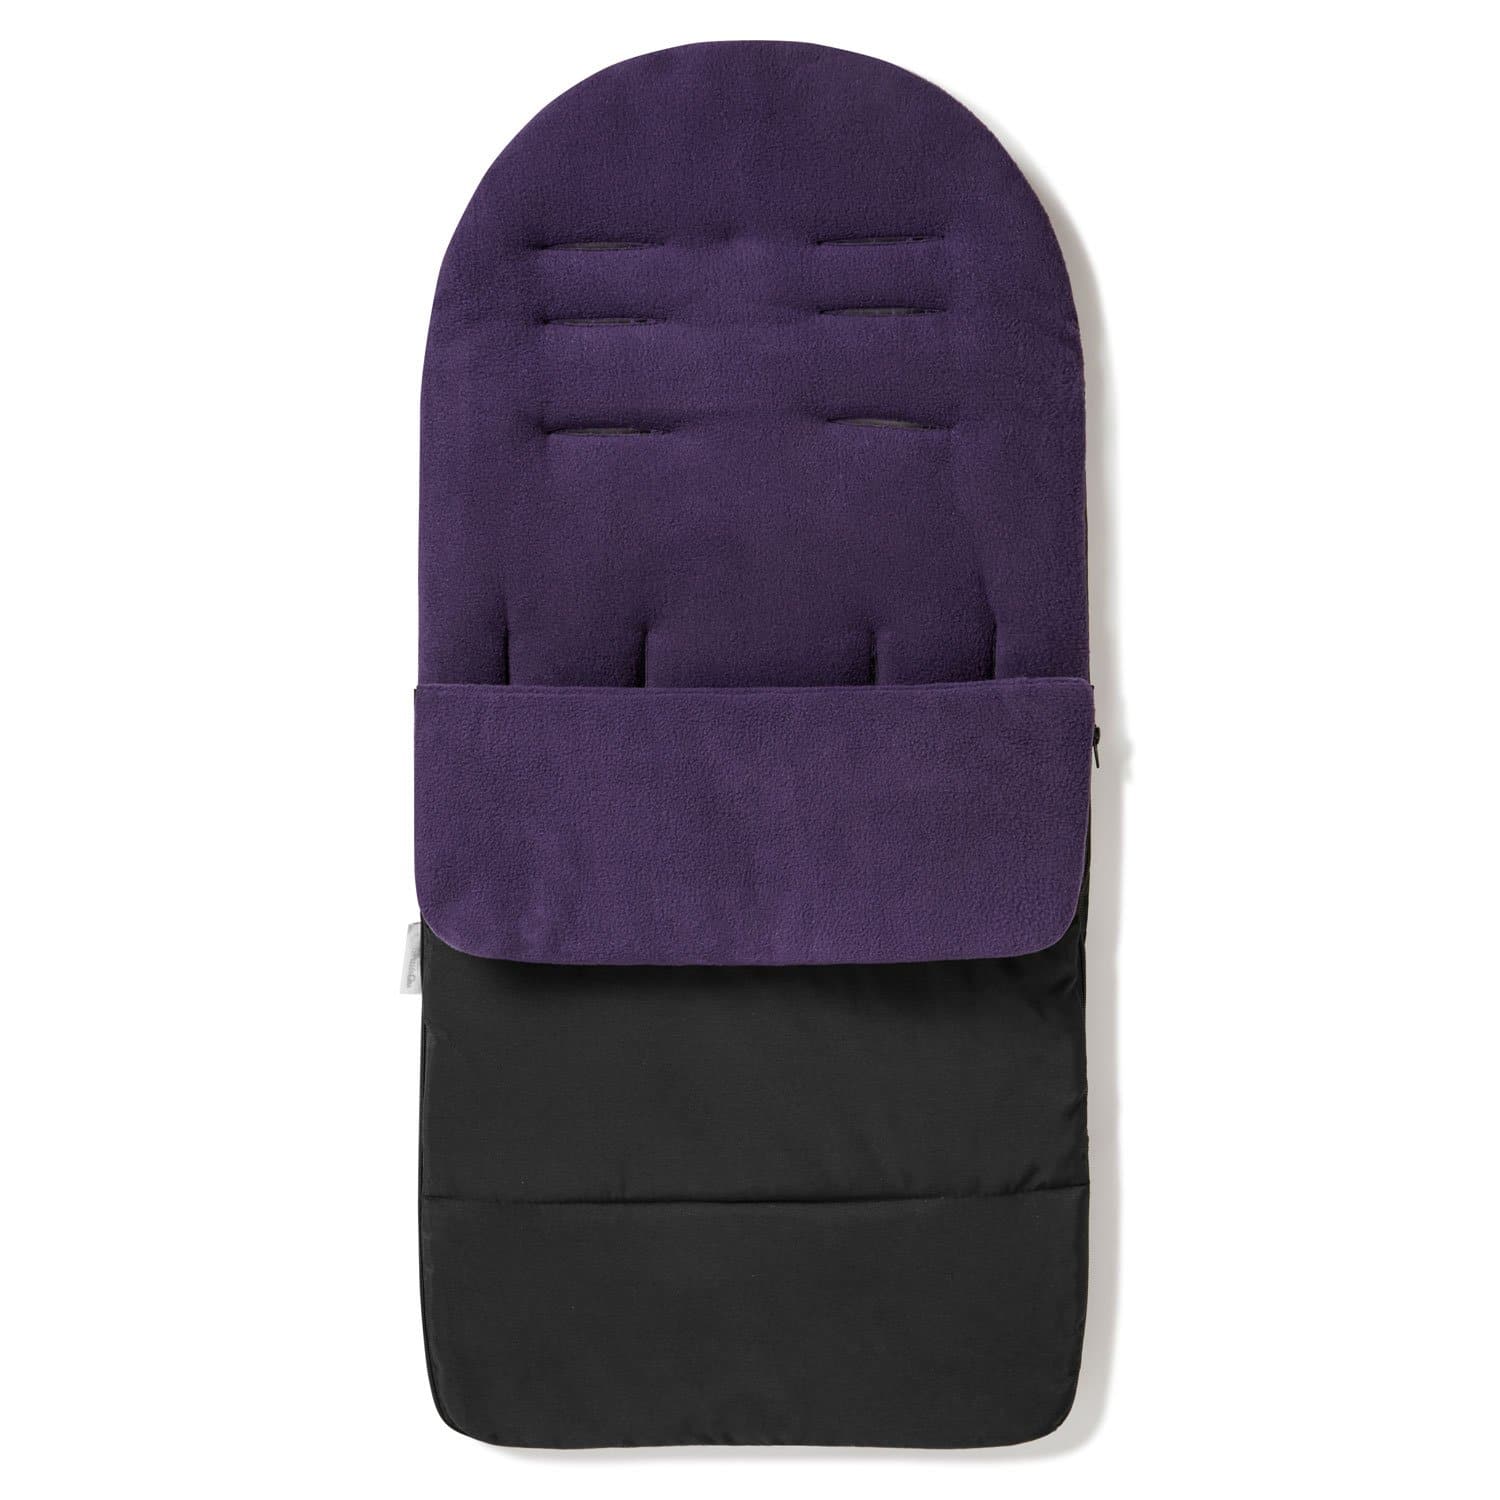 Premium Footmuff / Cosy Toes Compatible with Combi - Plum Purple / Fits All Models | For Your Little One